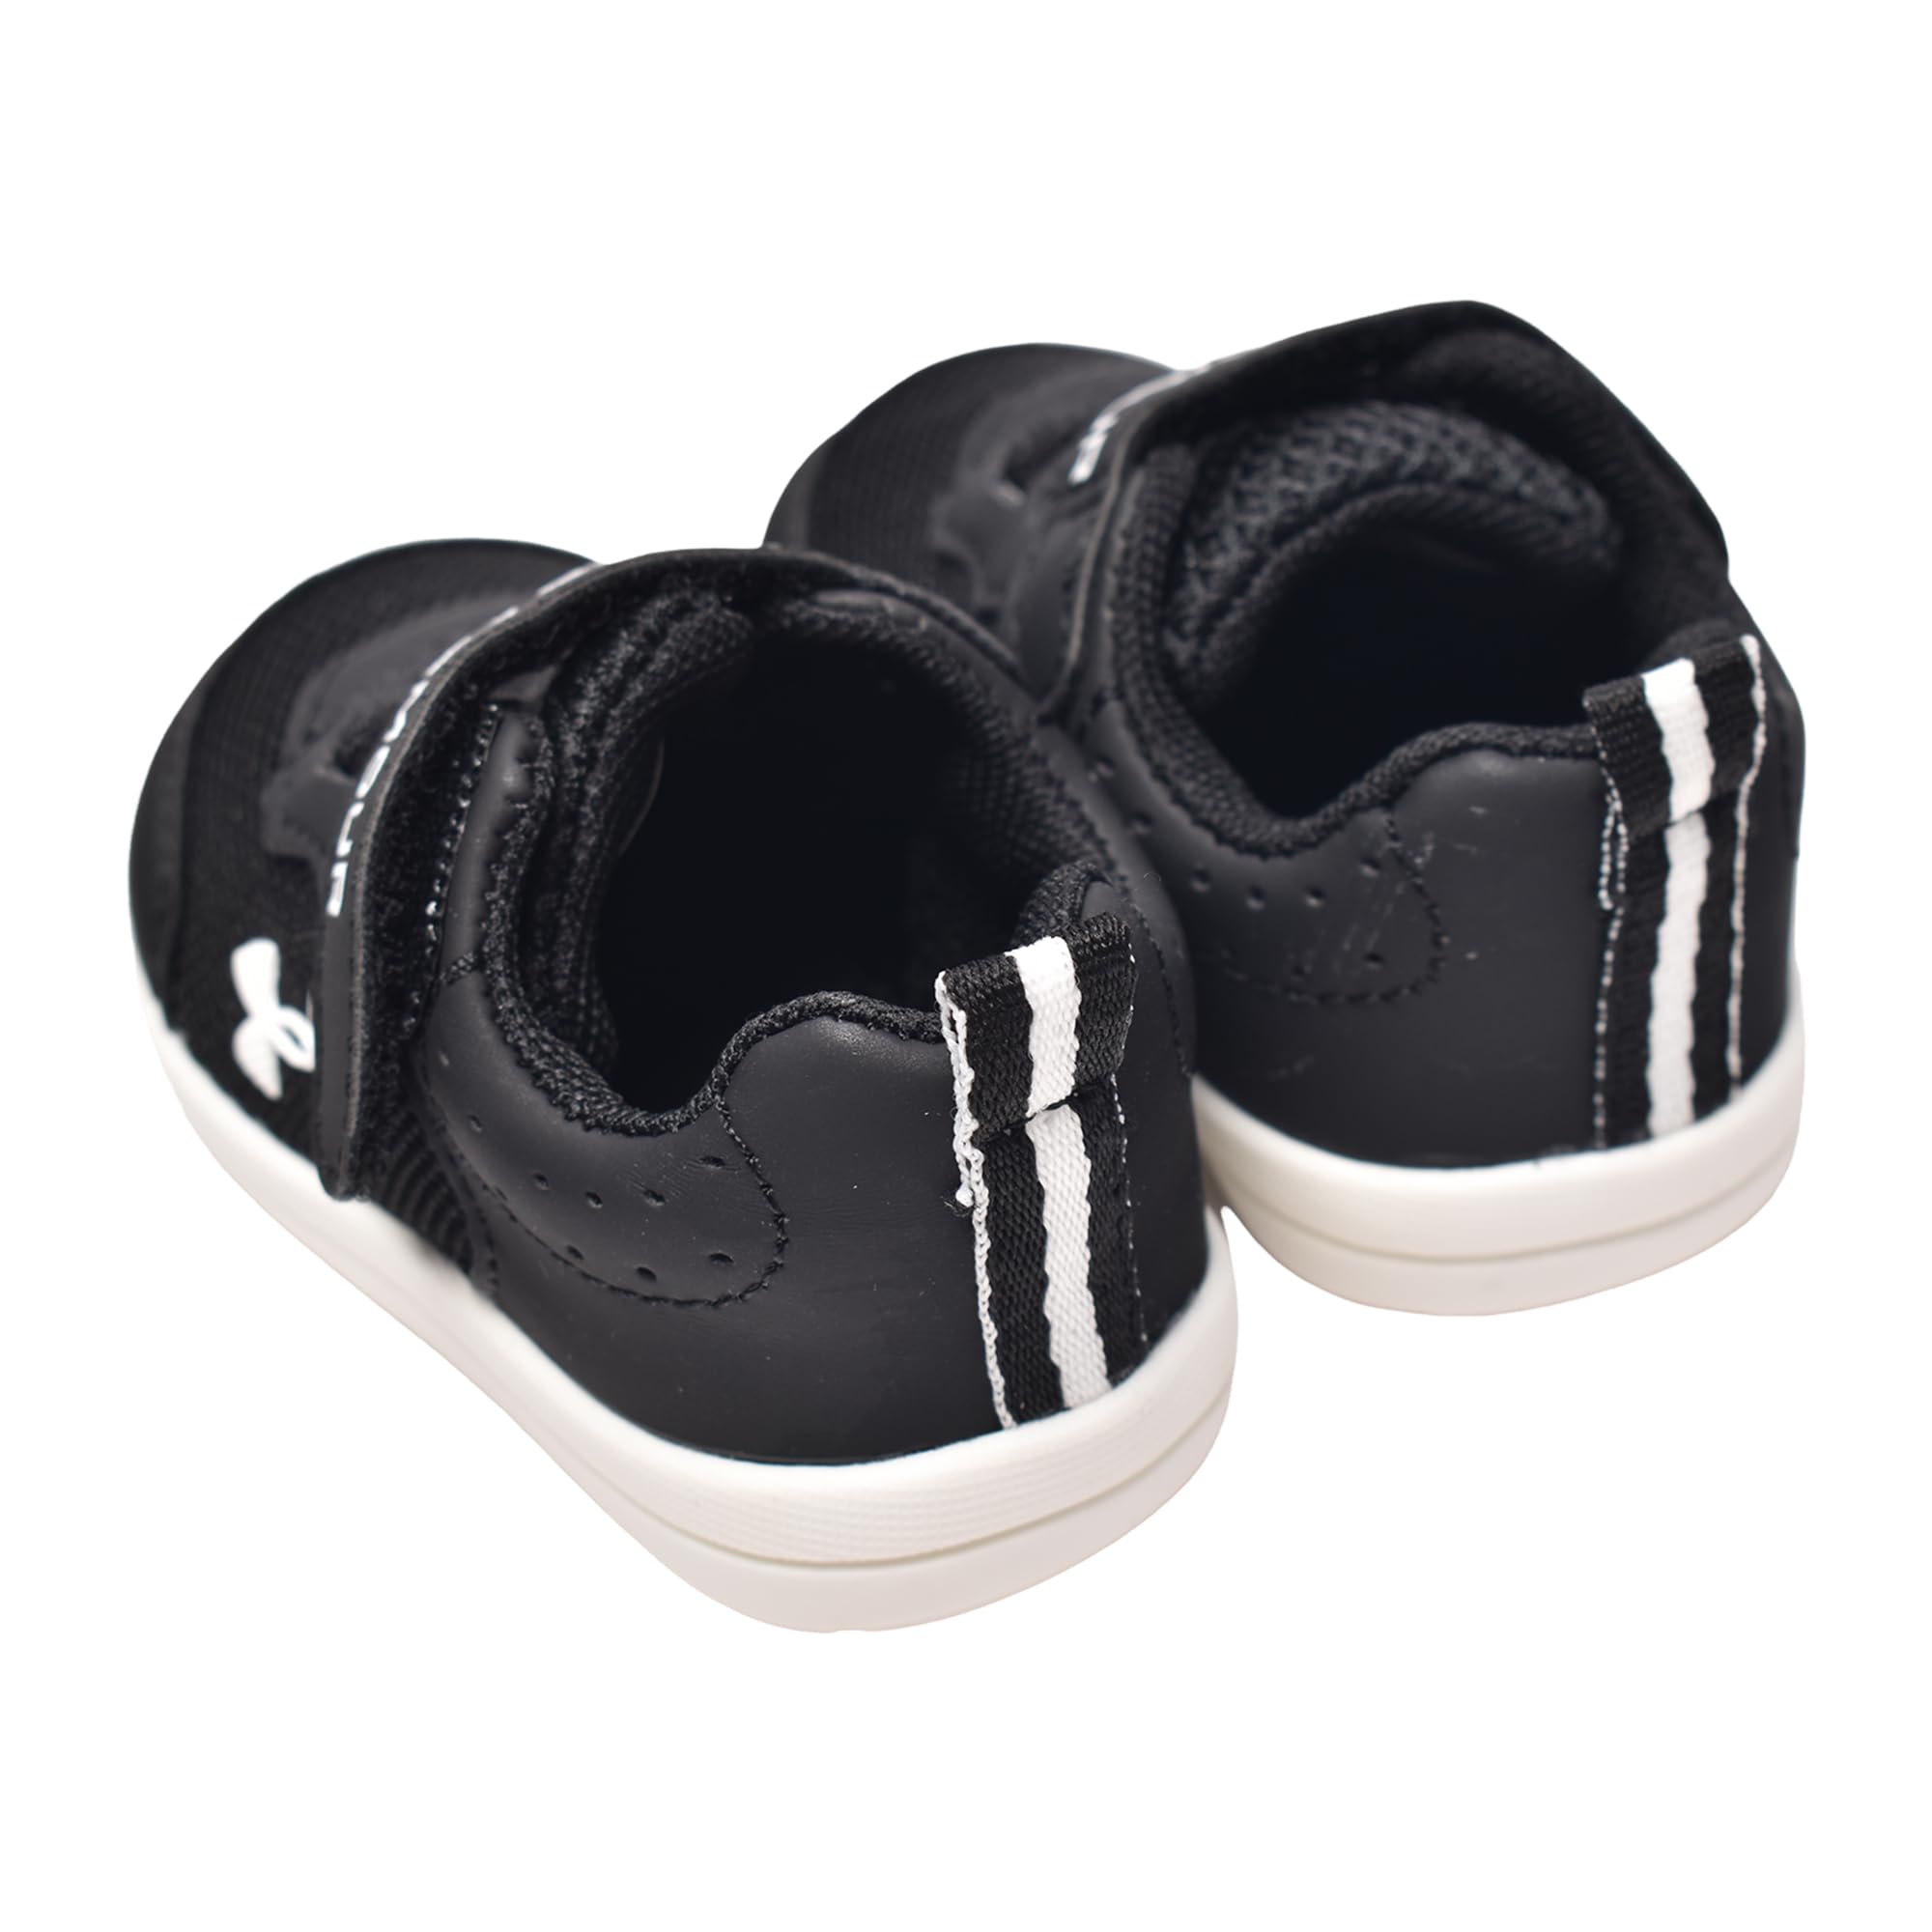 Under Armour Baby Crib Shoes